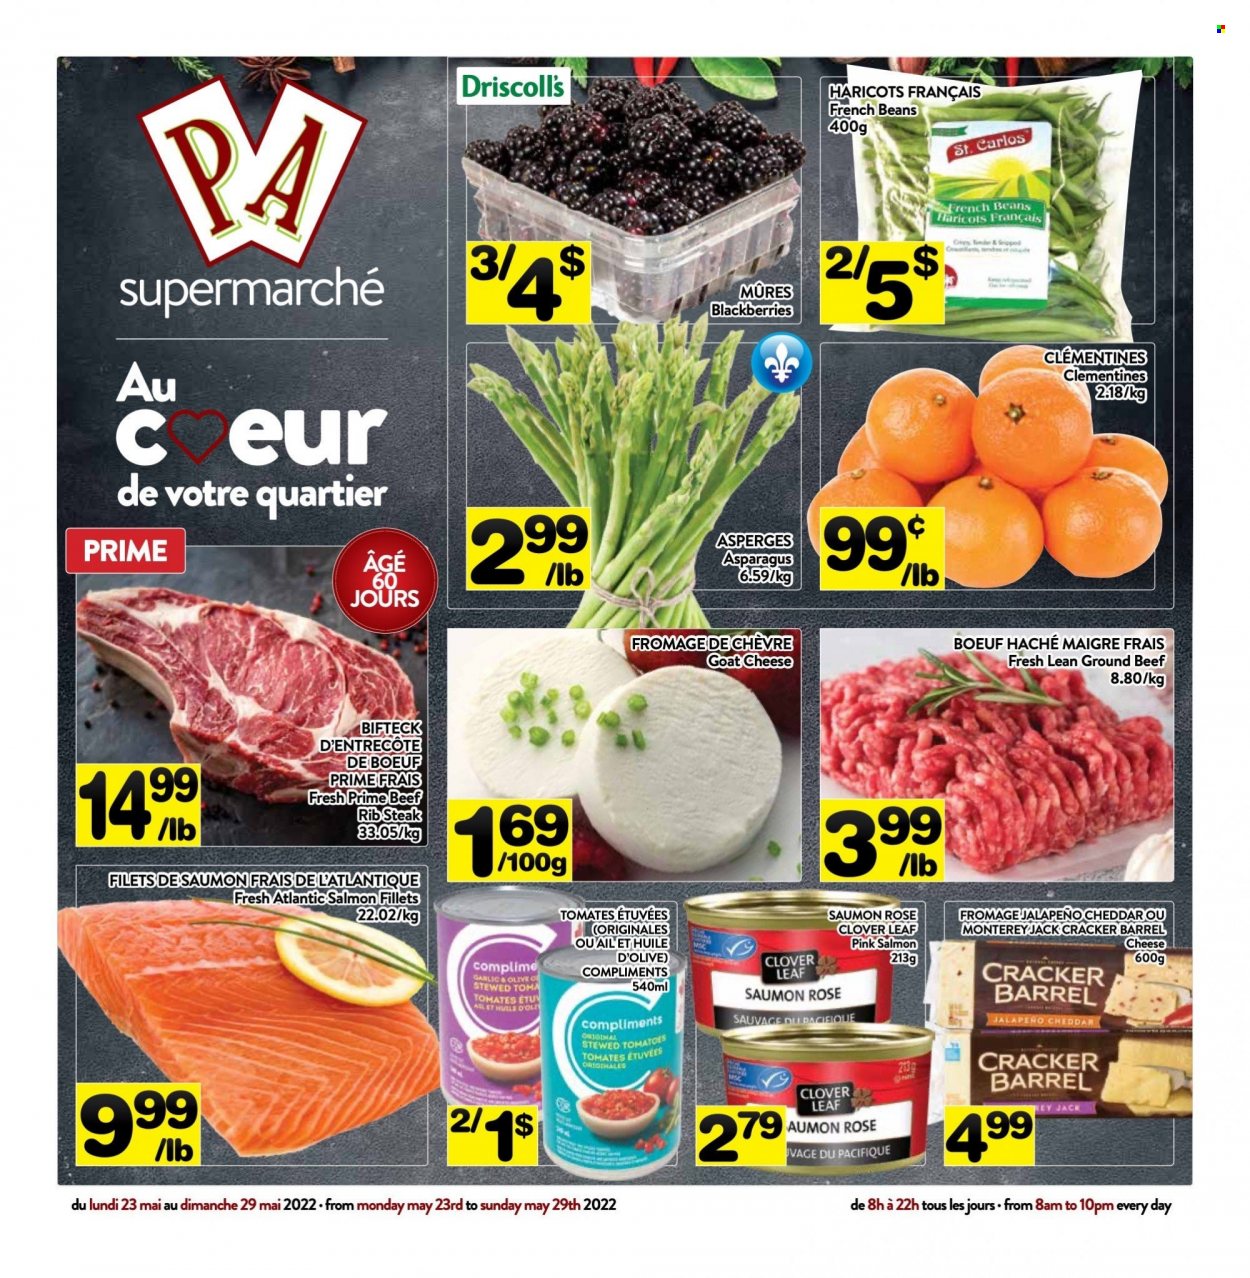 thumbnail - PA Supermarché Flyer - May 23, 2022 - May 29, 2022 - Sales products - asparagus, beans, french beans, tomatoes, jalapeño, blackberries, clementines, cod, salmon, salmon fillet, goat cheese, Monterey Jack cheese, cheddar, cheese, Clover, crackers, wine, rosé wine, beef meat, ground beef, steak. Page 1.